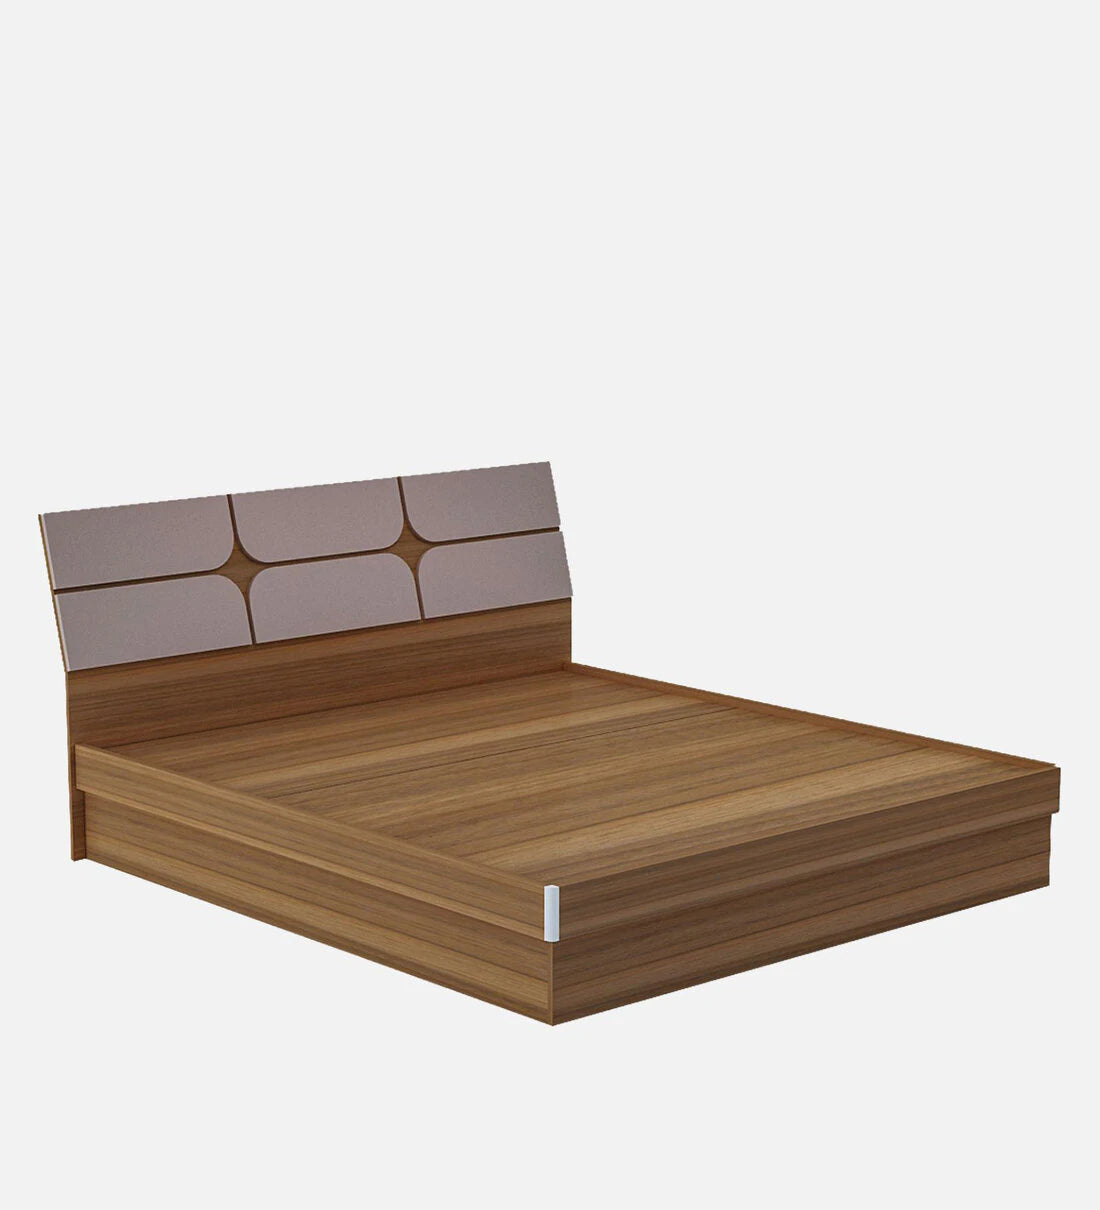 Bromo King Size Bed in Teak Finish with Hydraulic Storage